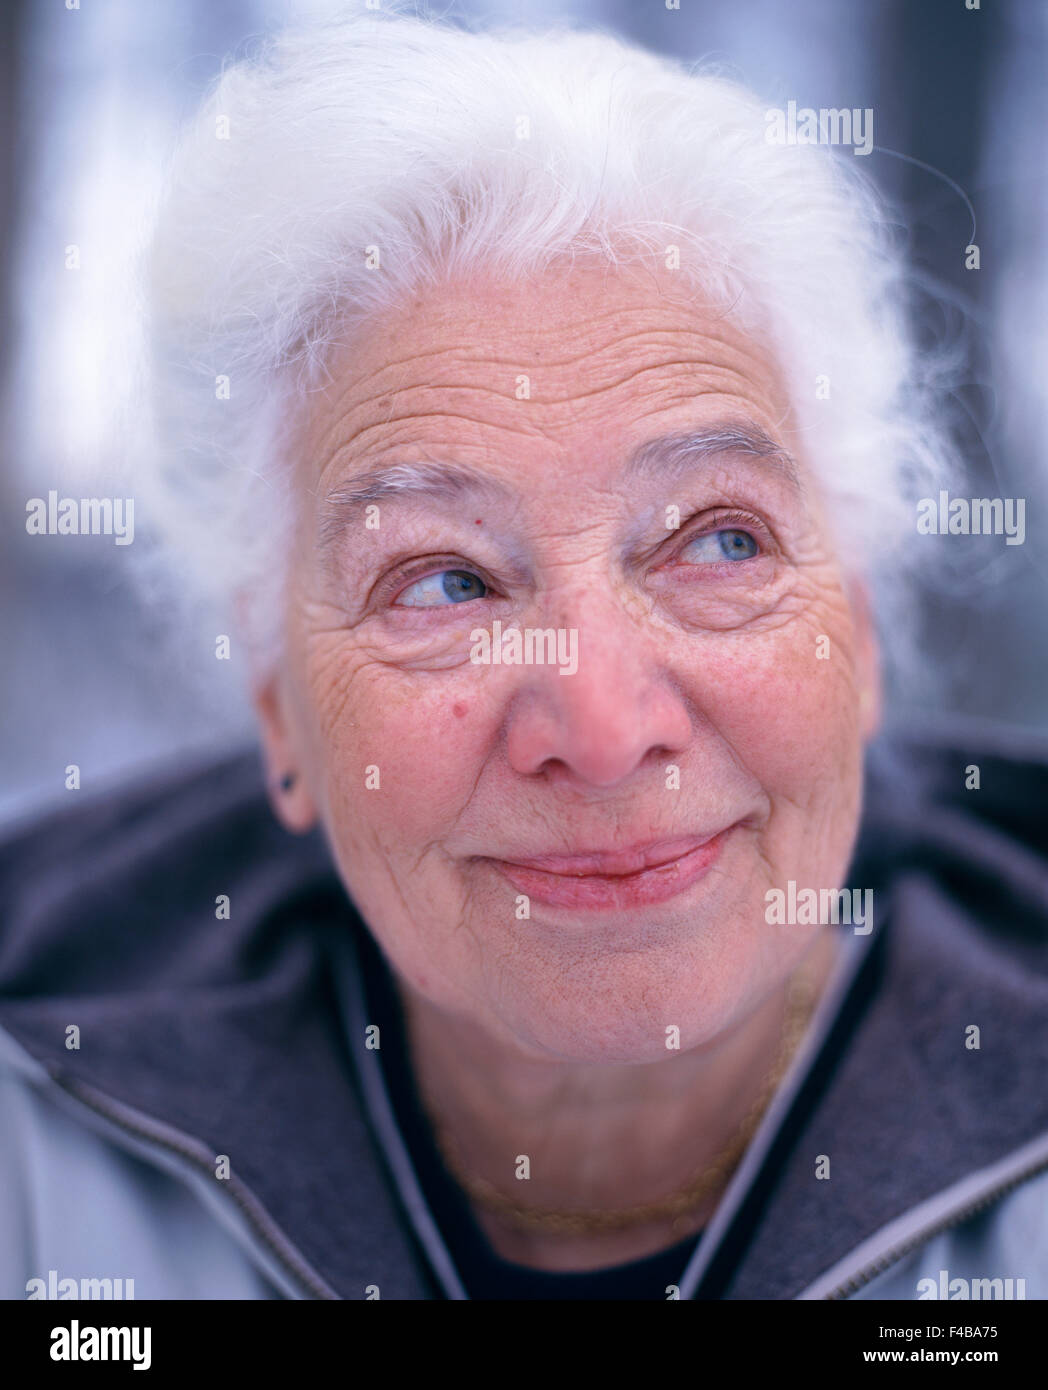 70 74 Years 75 79 Years Adults Only Color Image Elderly Woman Face Friendly Glance Grey Haired 0331